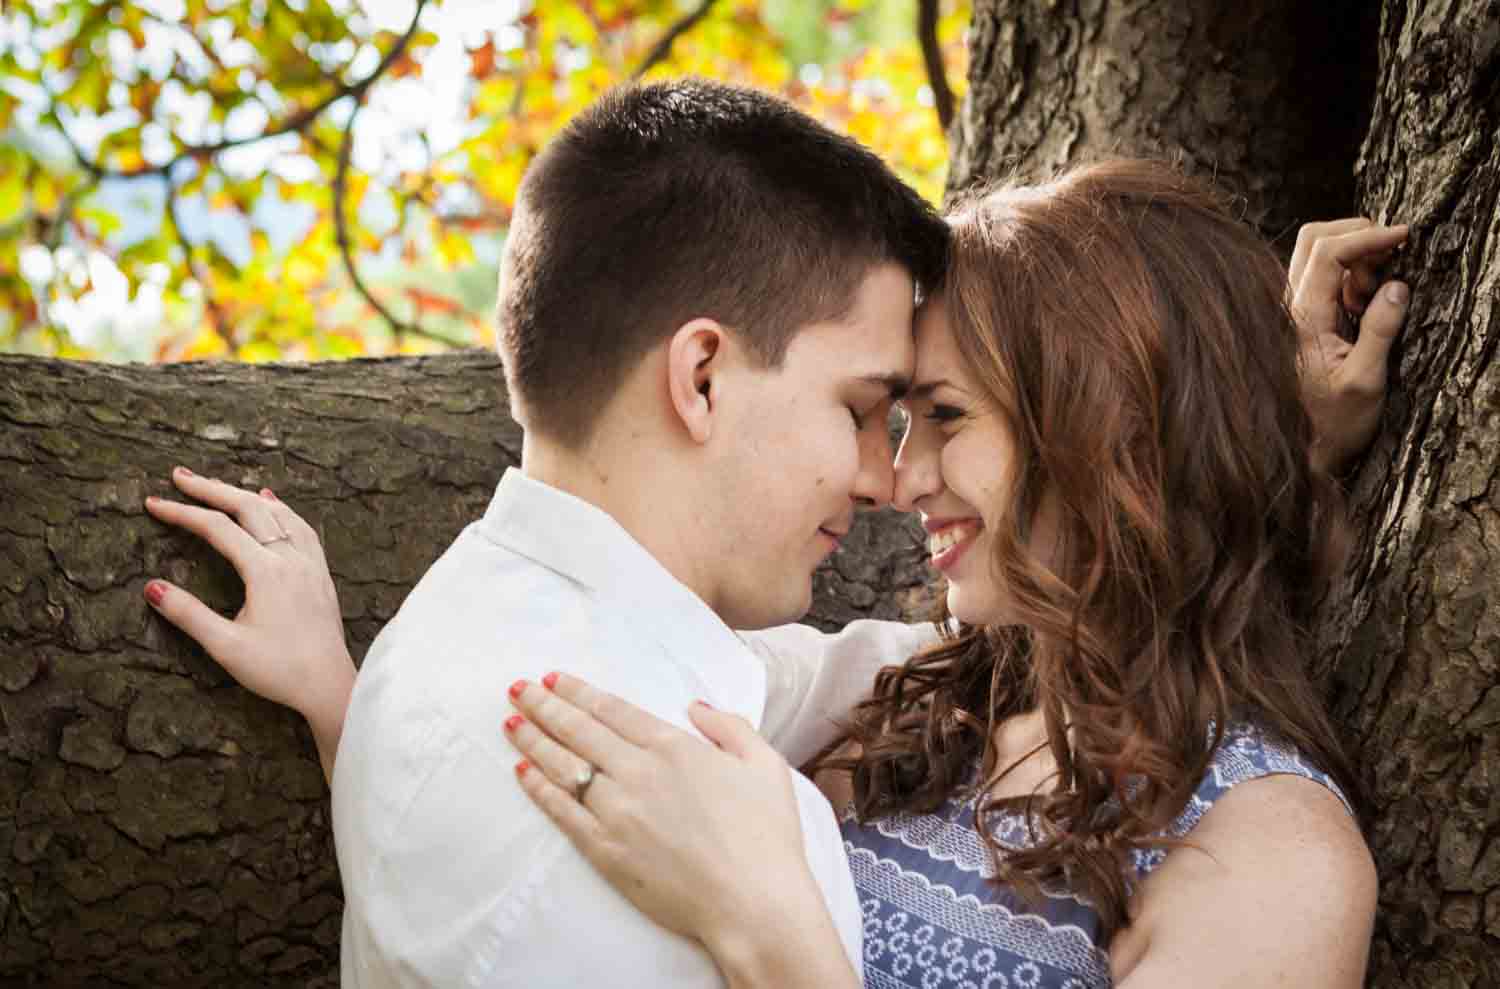 Couple touching foreheads next to tree